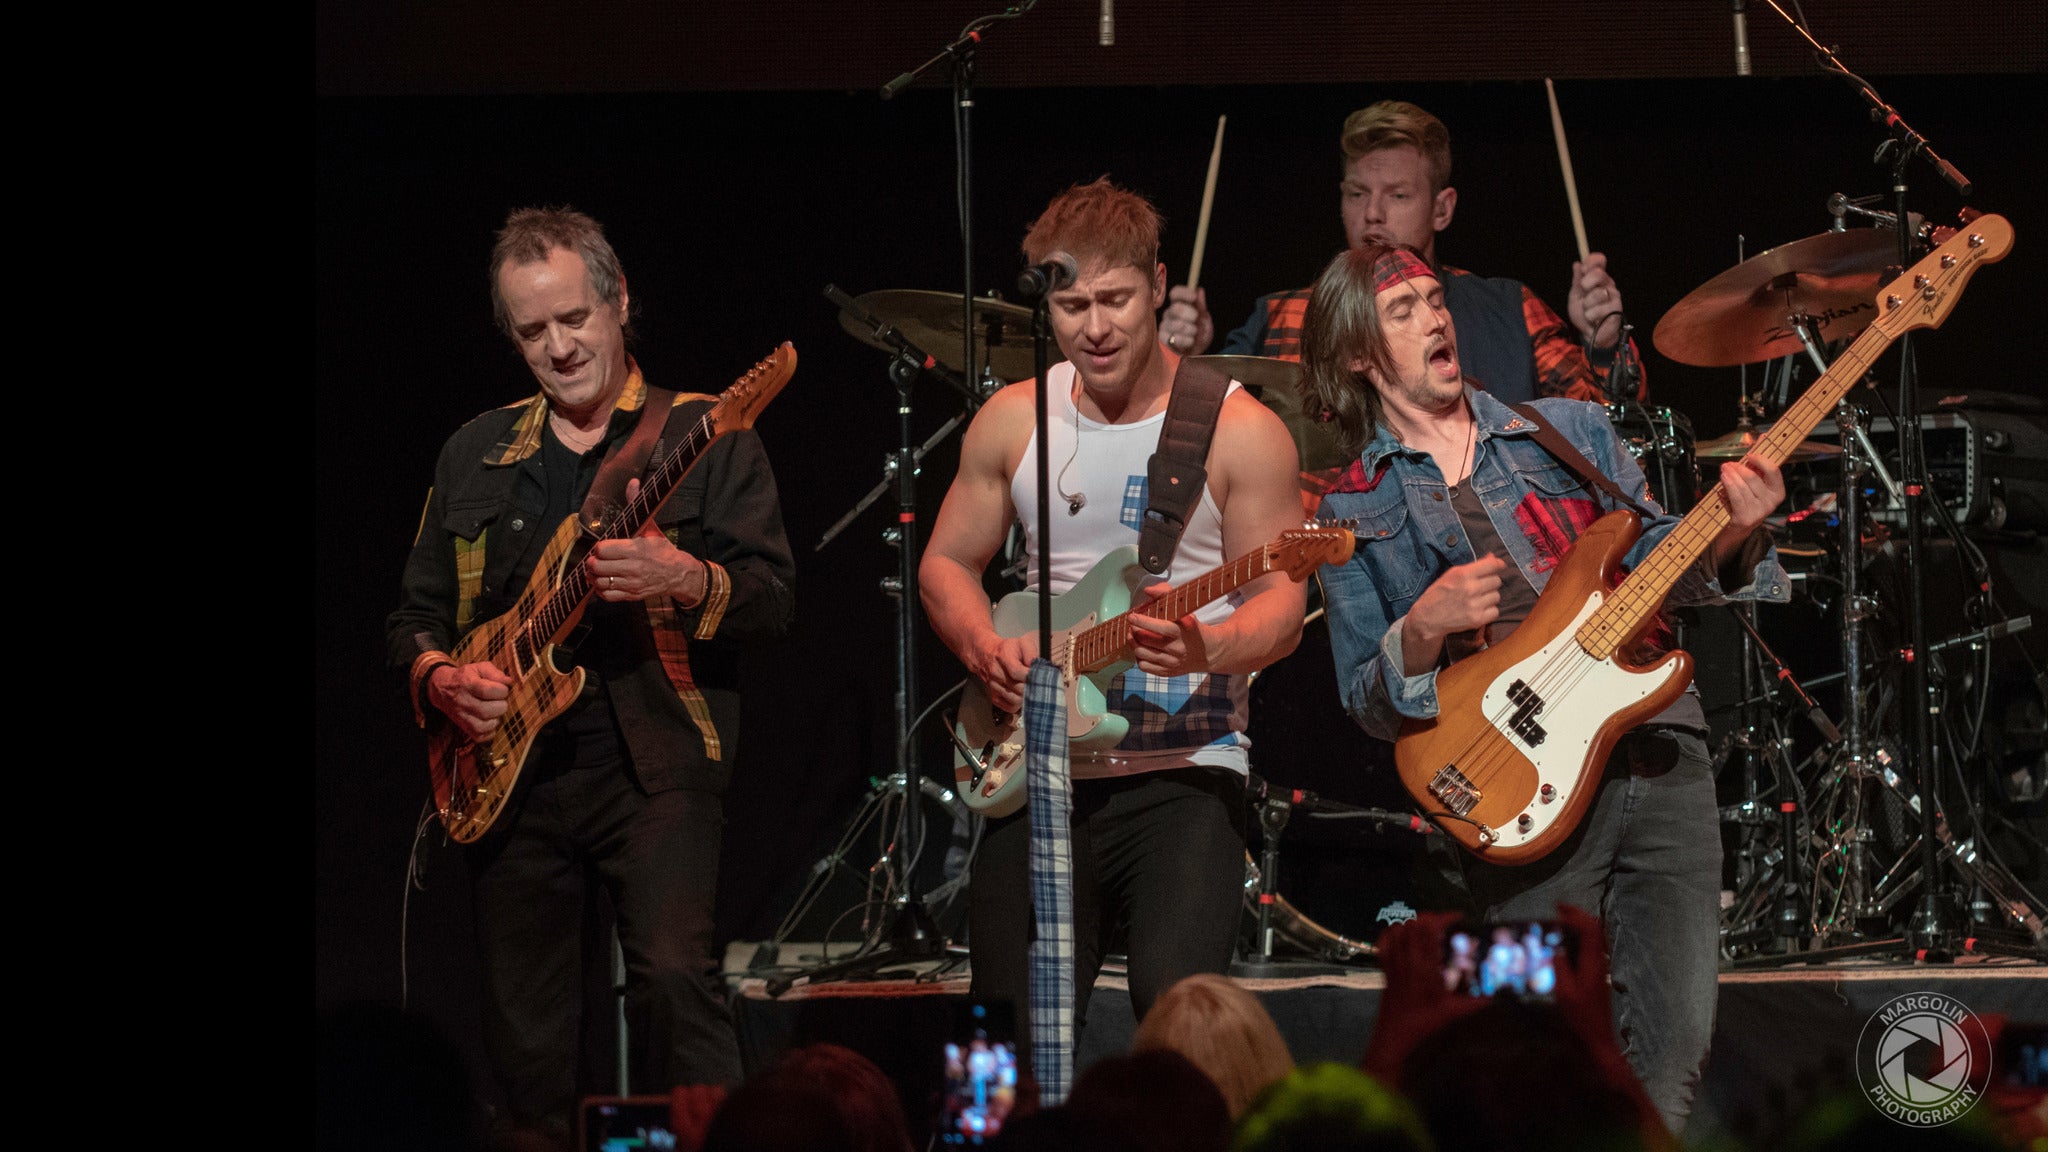 Bay City Rollers in Rama promo photo for Gateway presale offer code